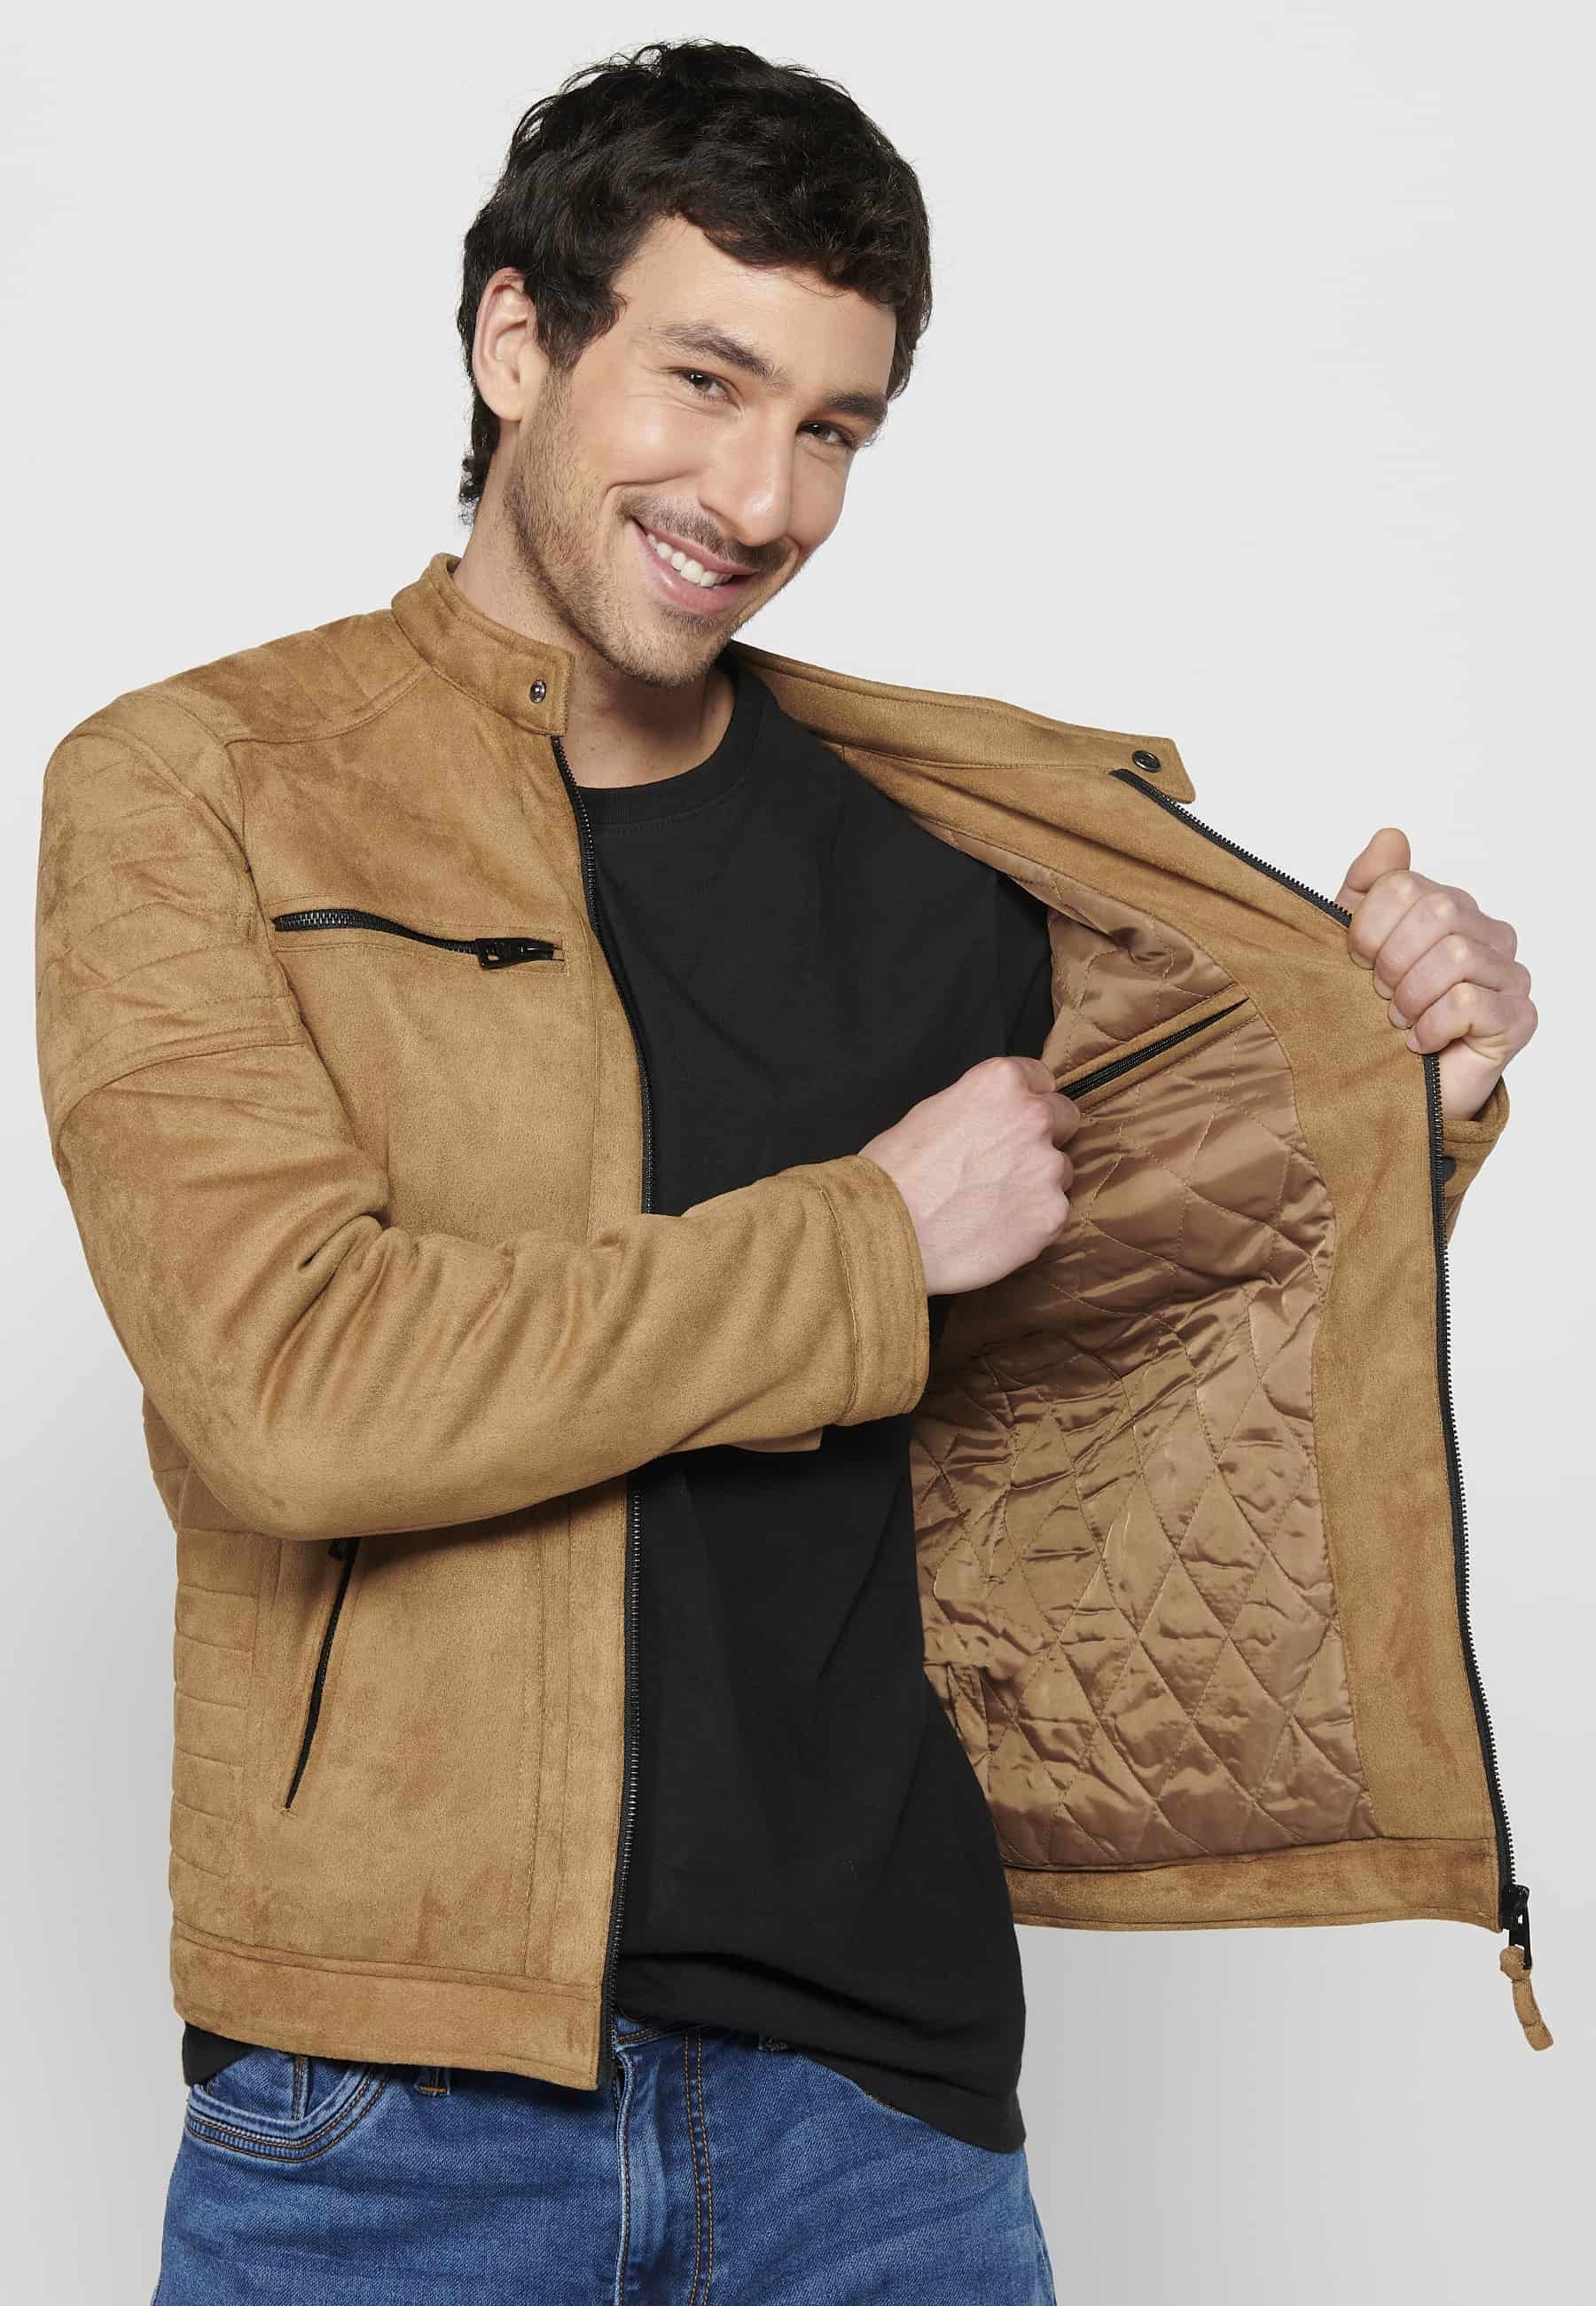 Men's Long Sleeve Jacket with Round Neck and Zipper Front Closure with Four Pockets in Tan Color 10